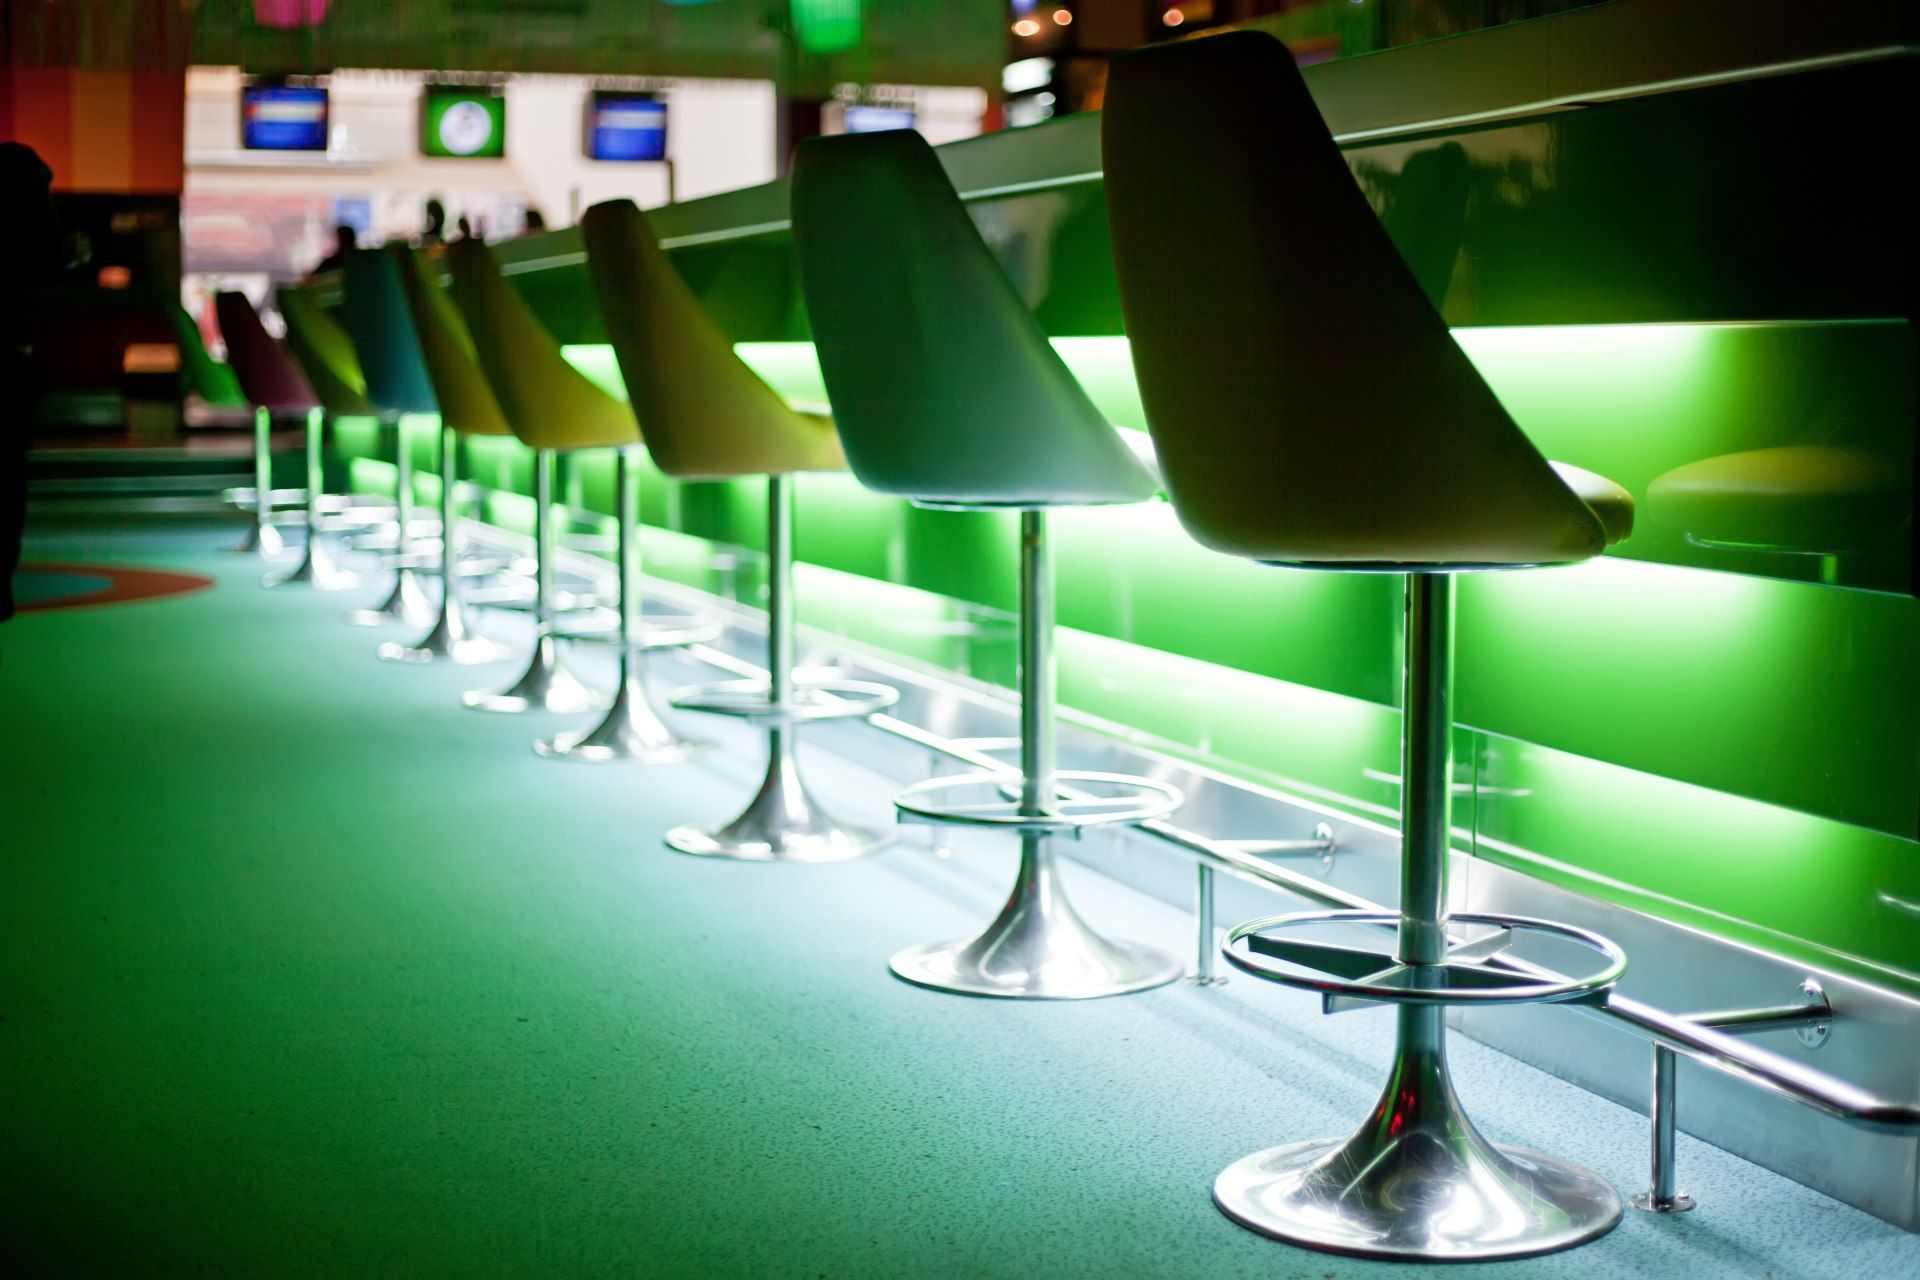 Chairs at a bar with green lighting sit empty - pub curfew